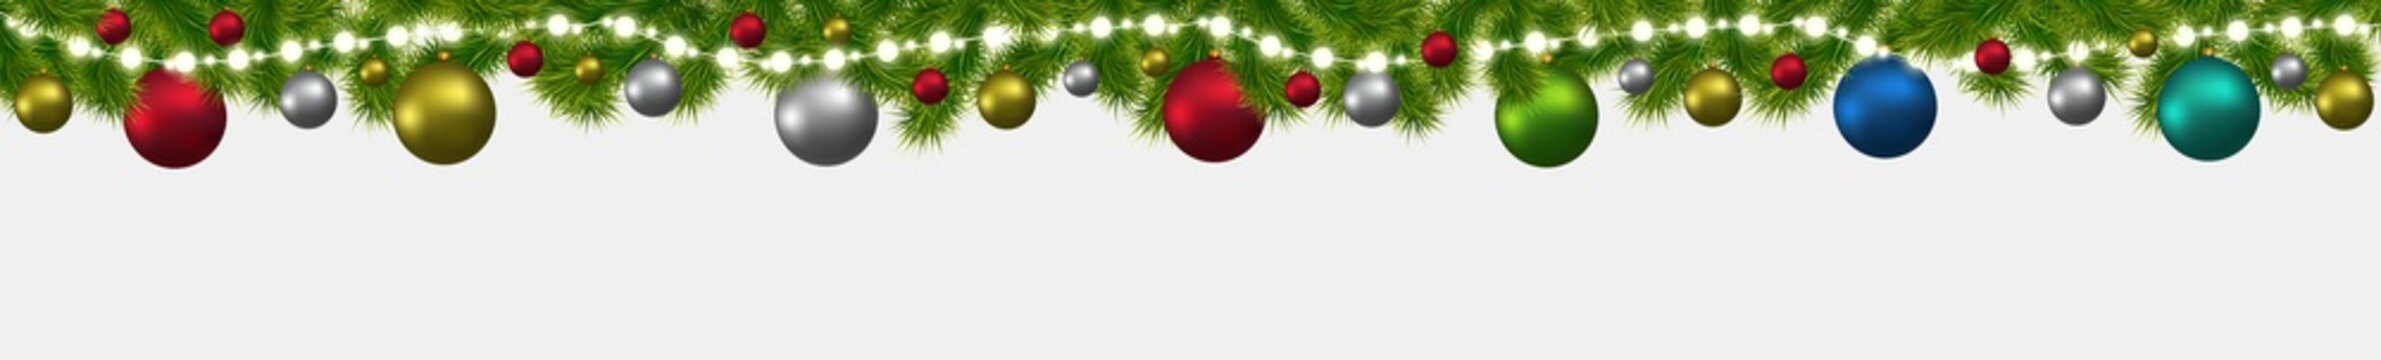 Christmas and New Year banner with fir-trees, garlands and glowing lights. Christmas card, flyer or site header.